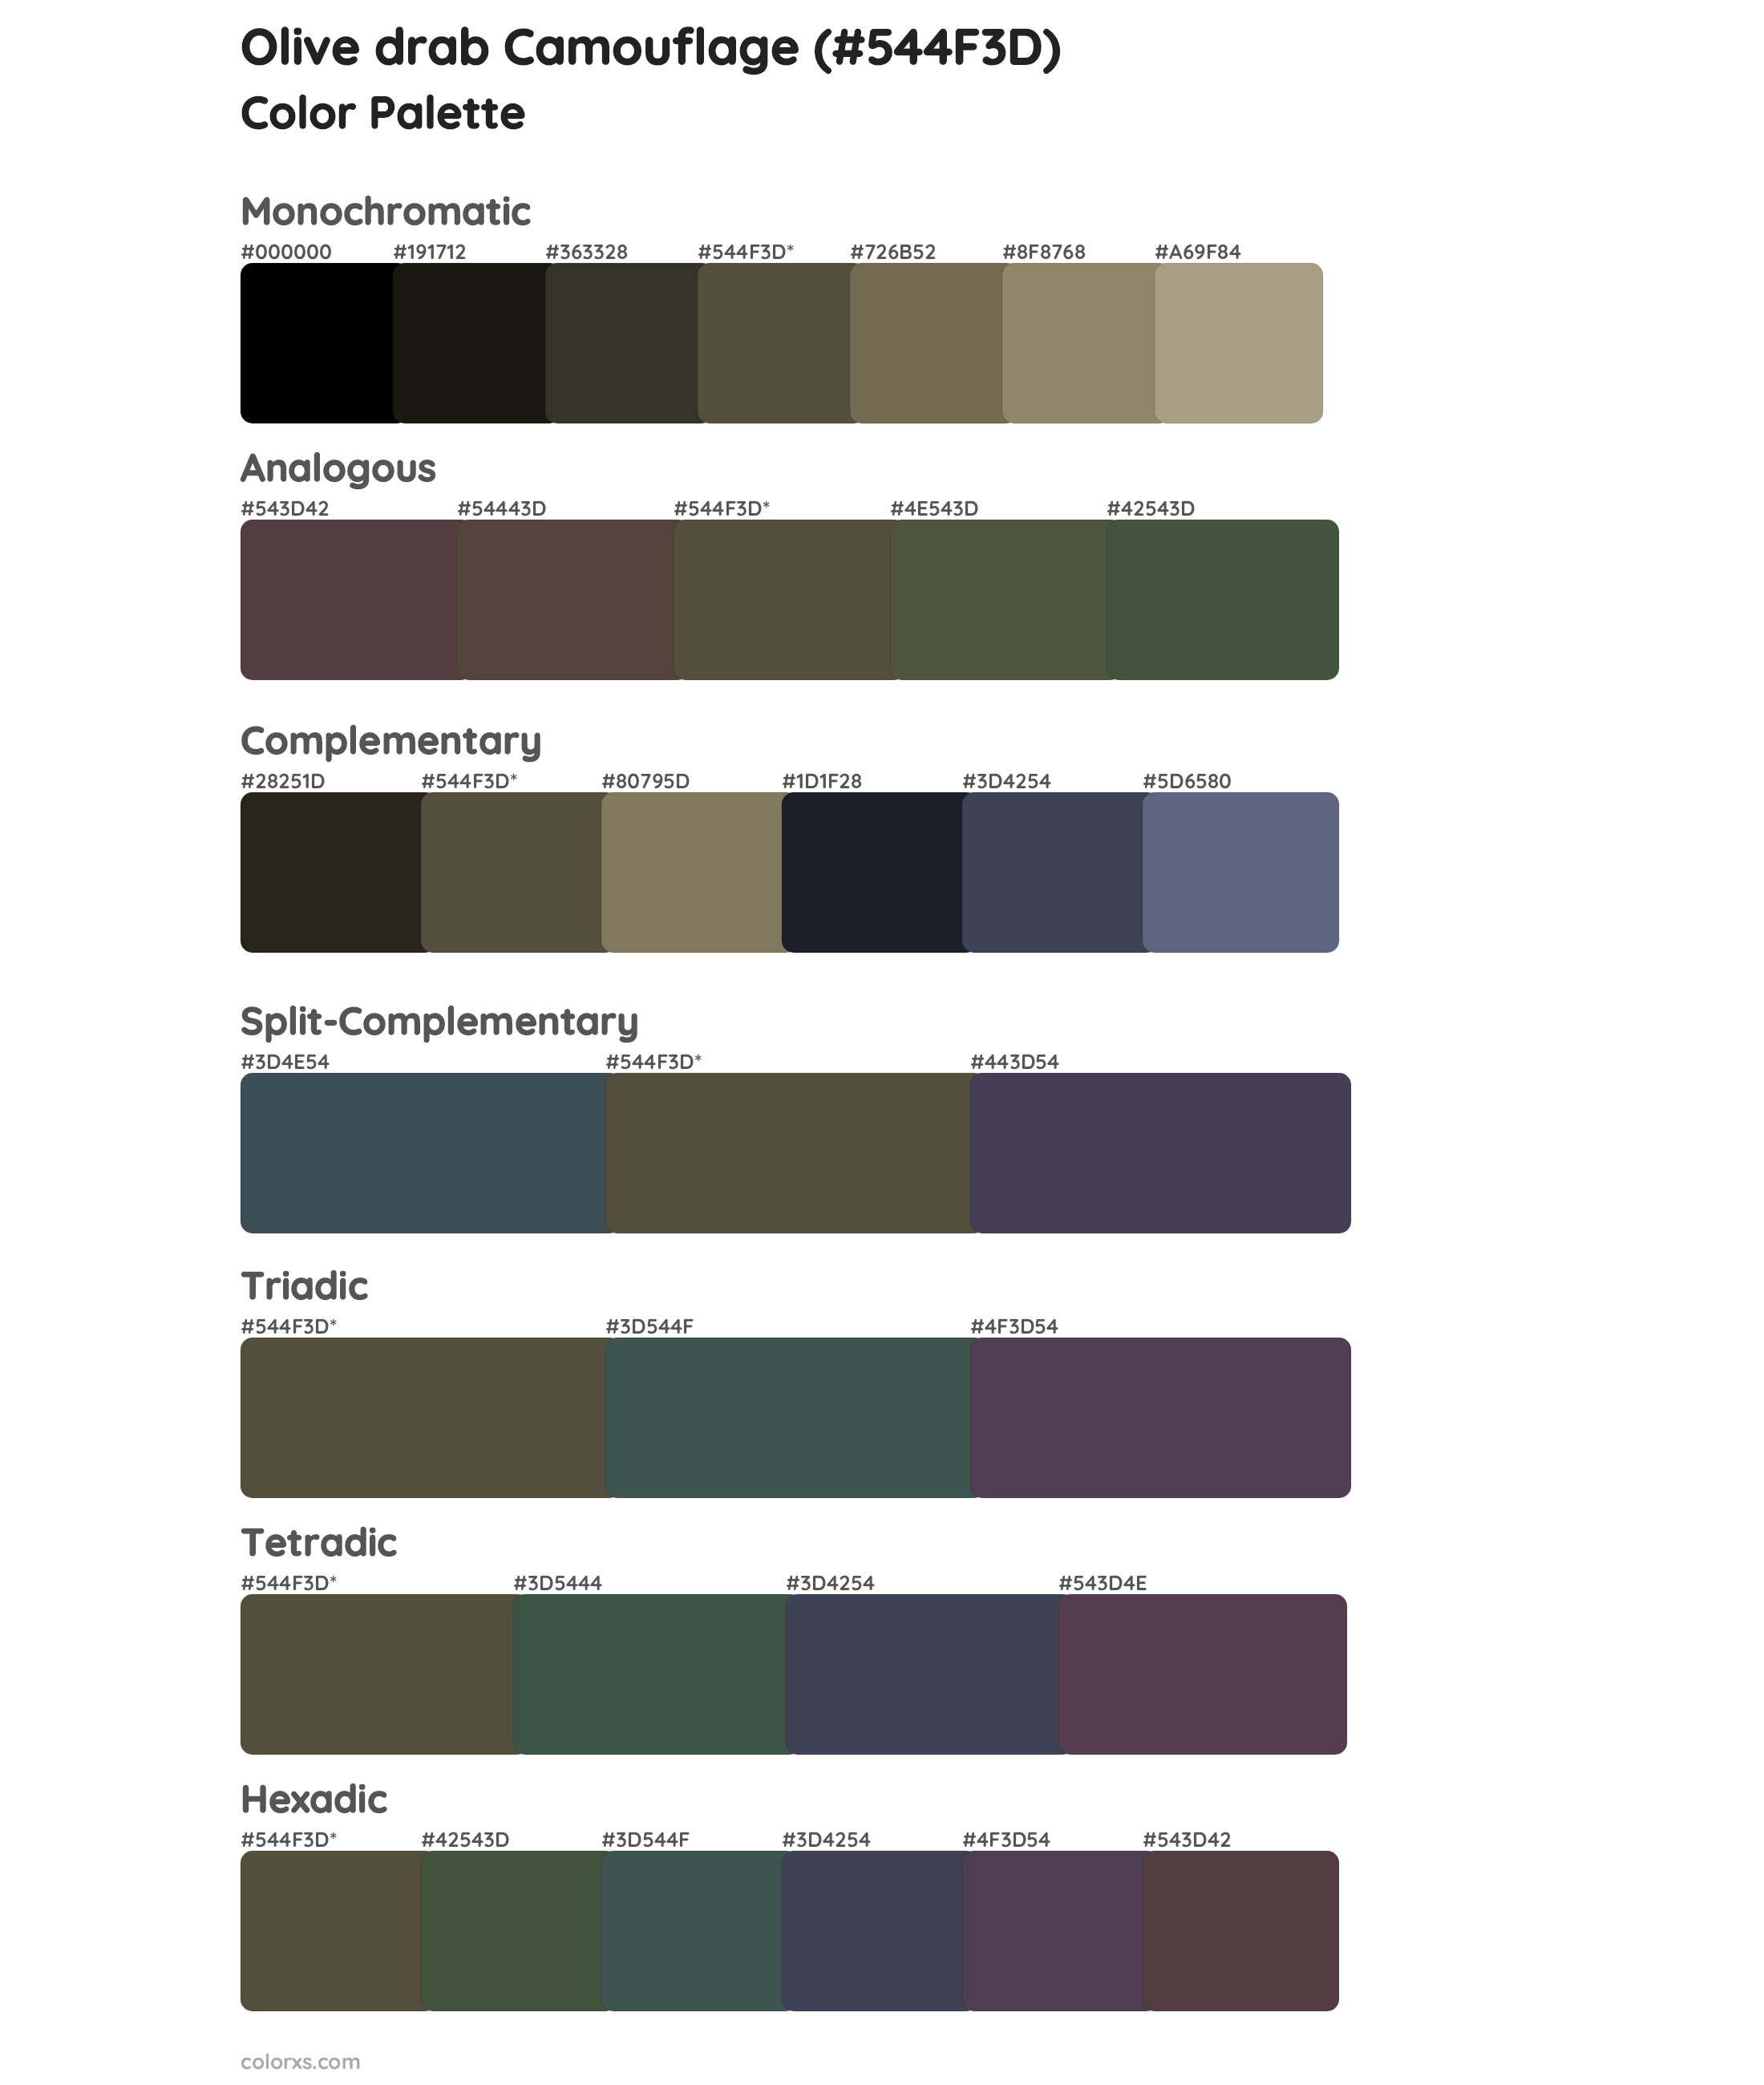 Olive drab Camouflage color palettes and color scheme combinations ...